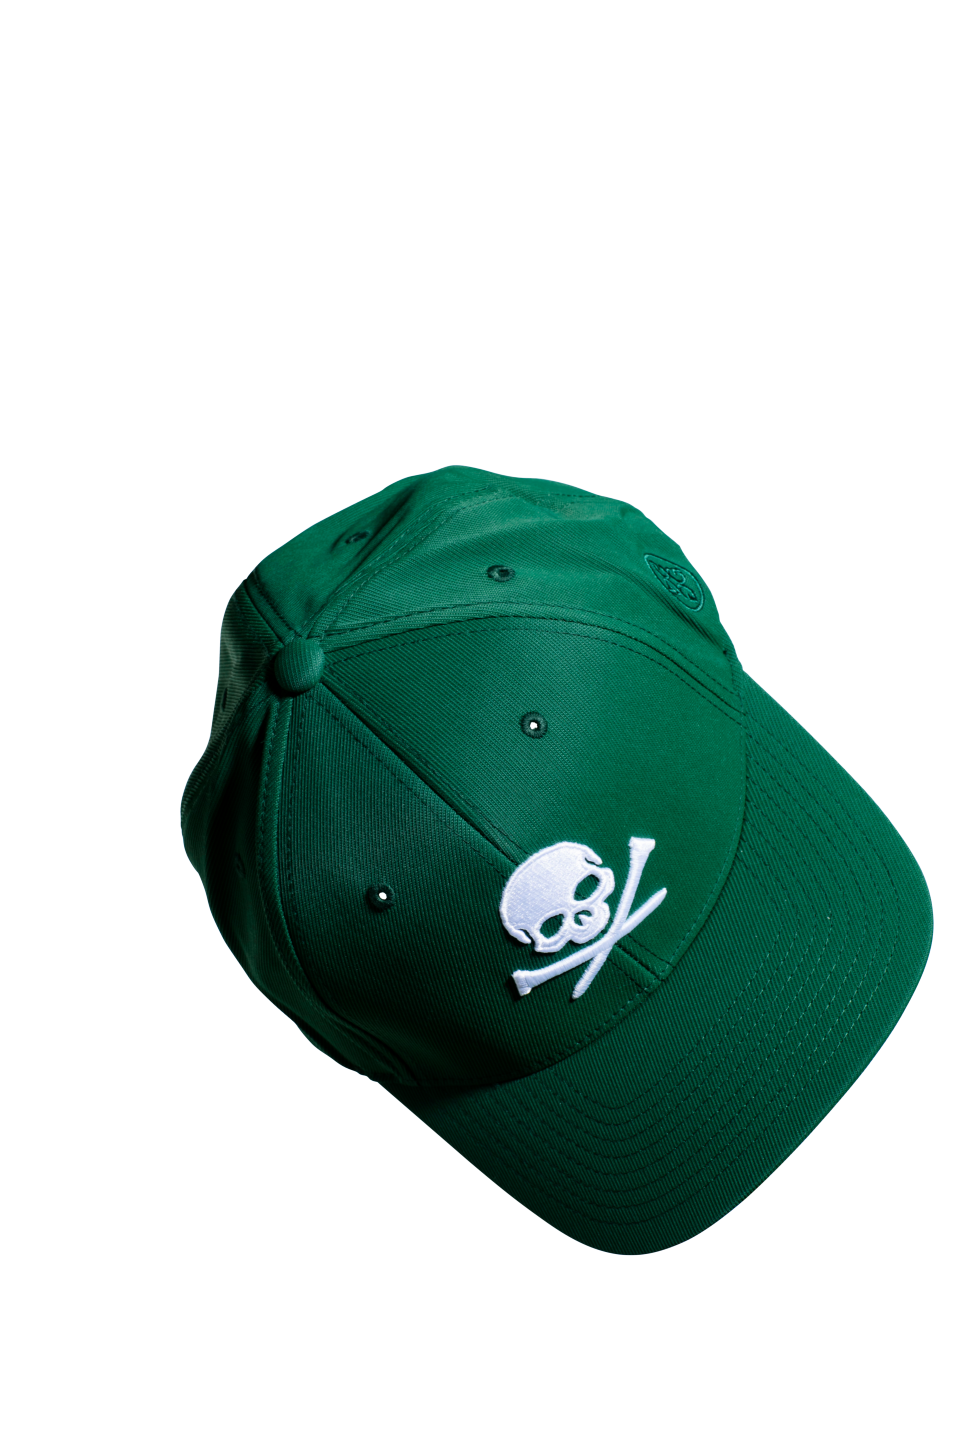 GFORE Golf Digest Hat.png